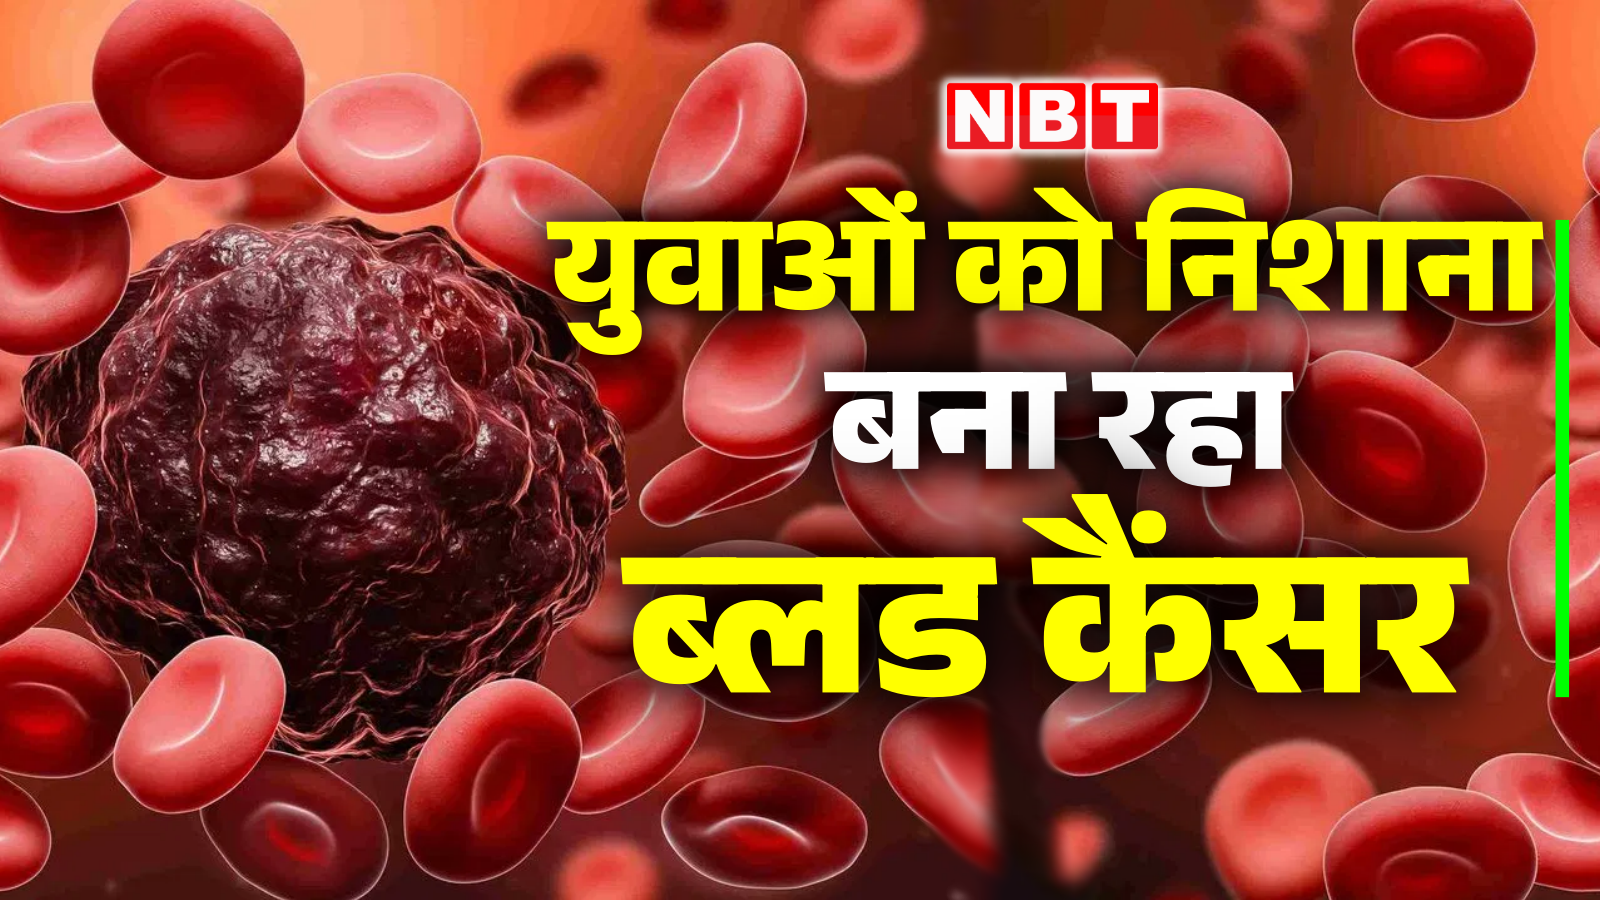 Cases of blood cancer are increasing among Indian youth, information came in Lancet report, know what are the symptoms